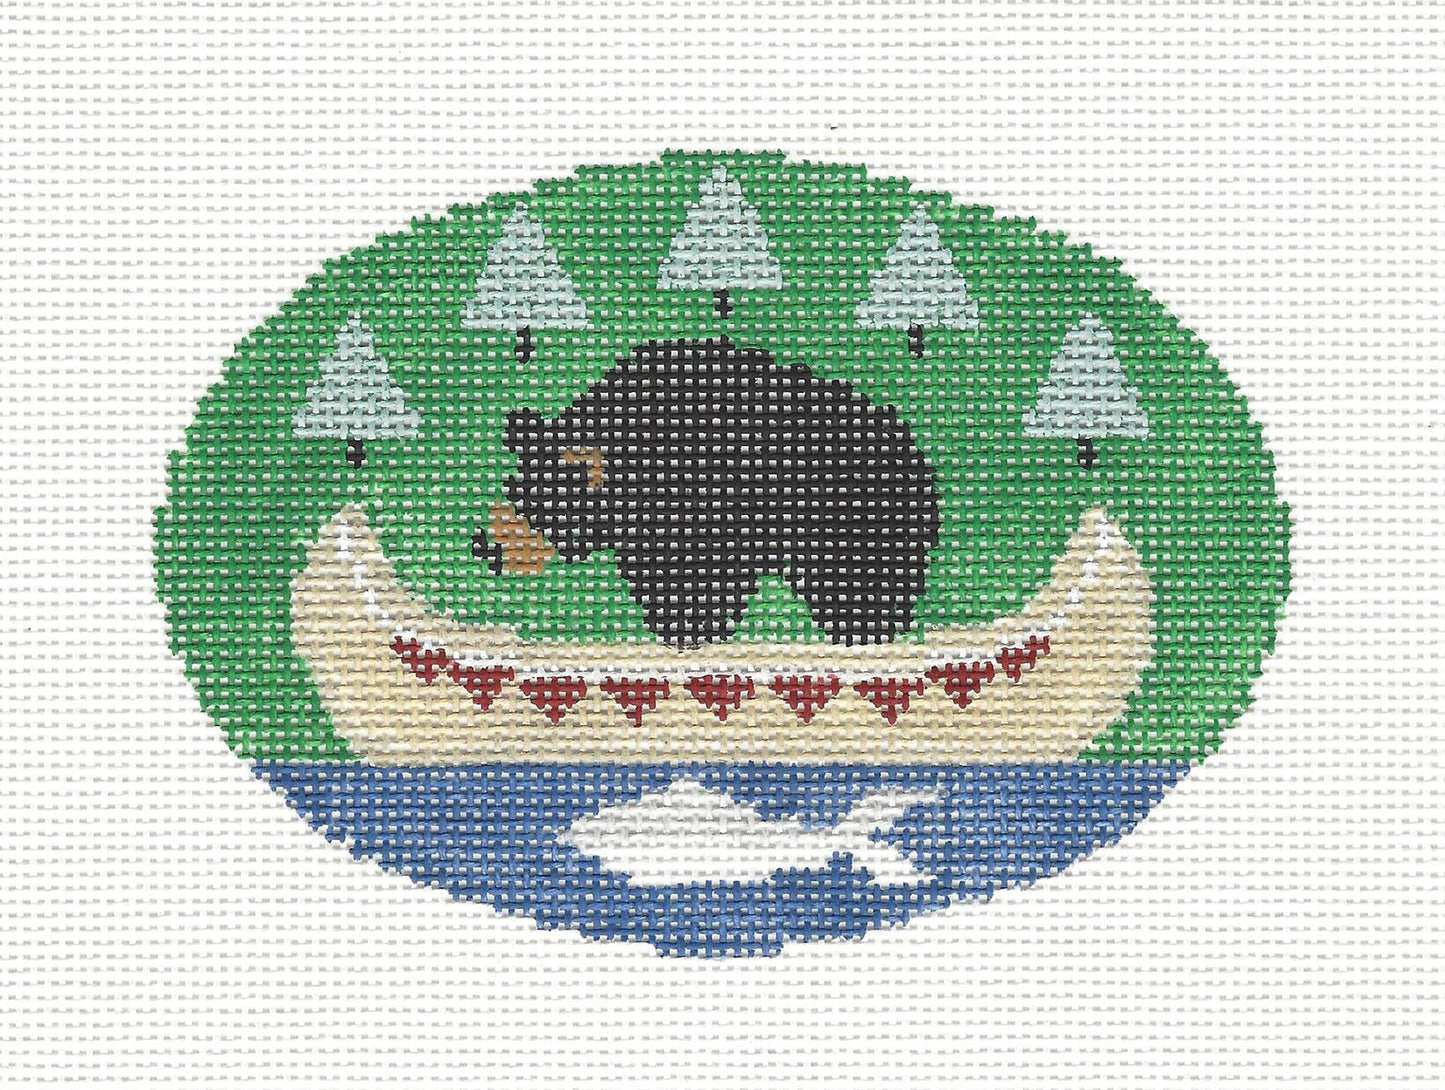 Oval ~ Black Bear in an Indian Canoe handpainted Needlepoint Canvas by Kathy Schenkel